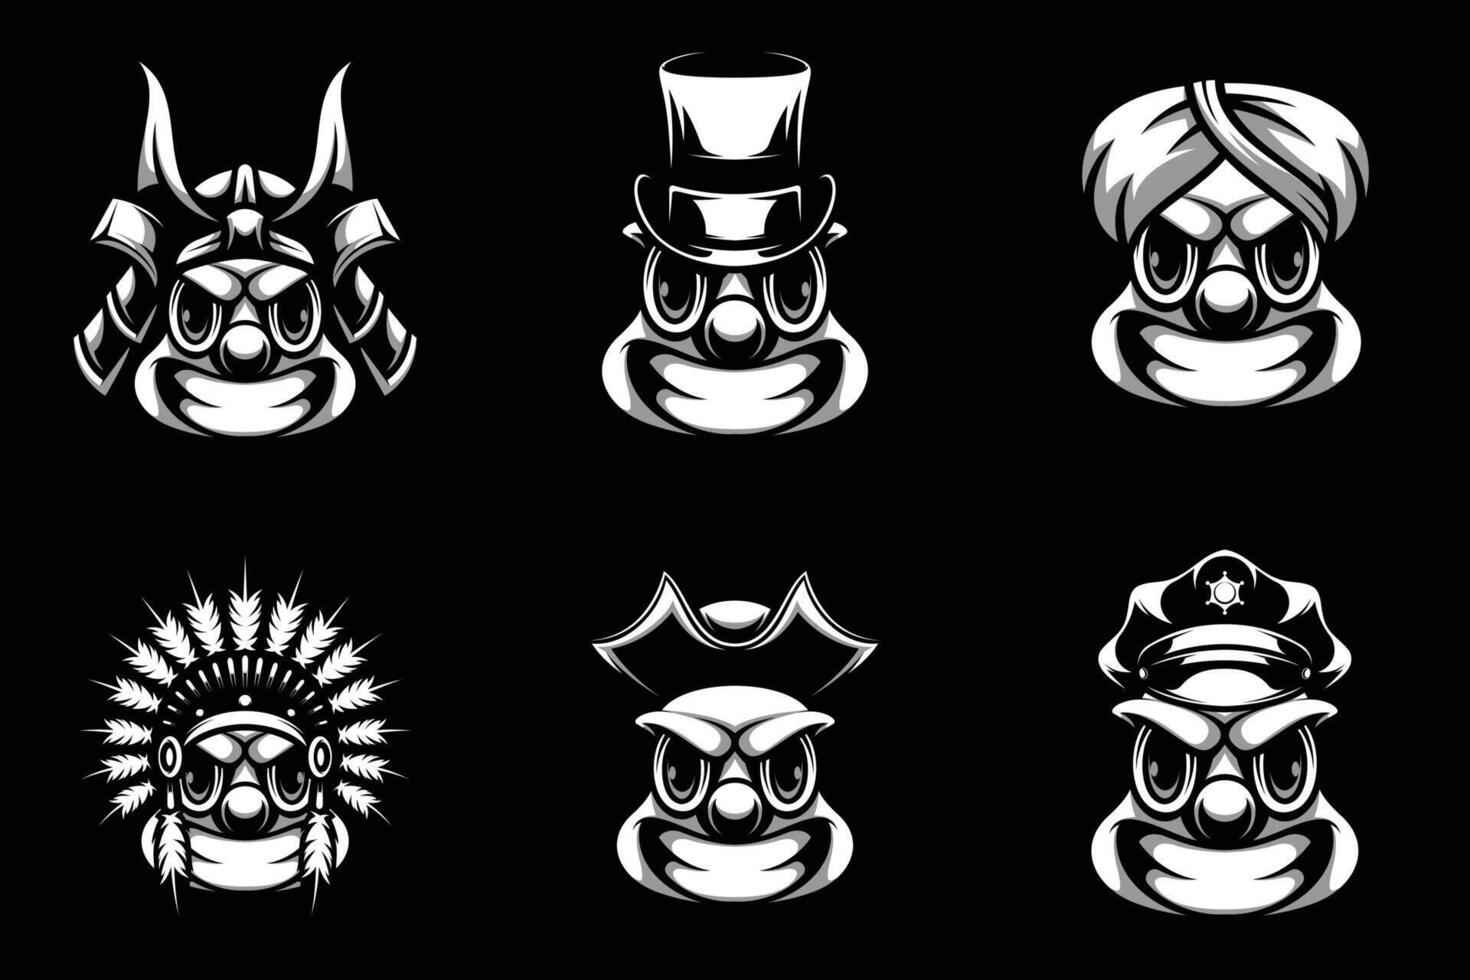 Clown Heads Bundle Black and White vector